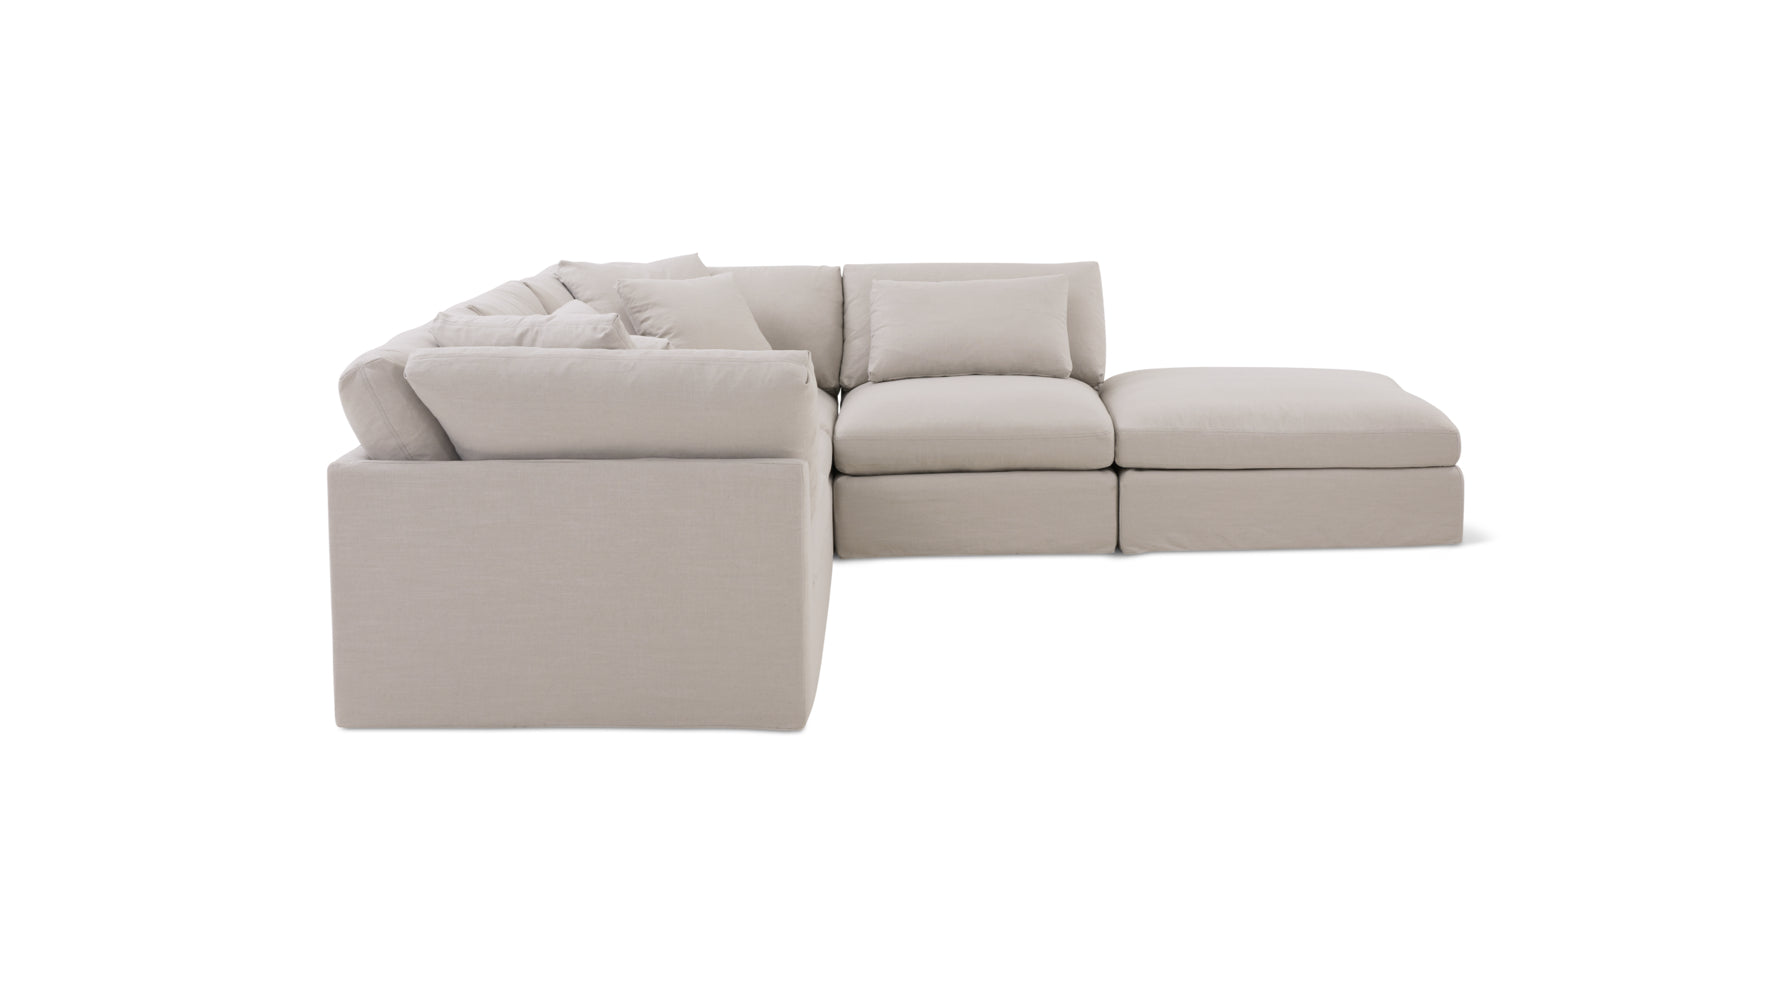 Get Together™ 5-Piece Modular Sectional, Large, Clay - Image 6